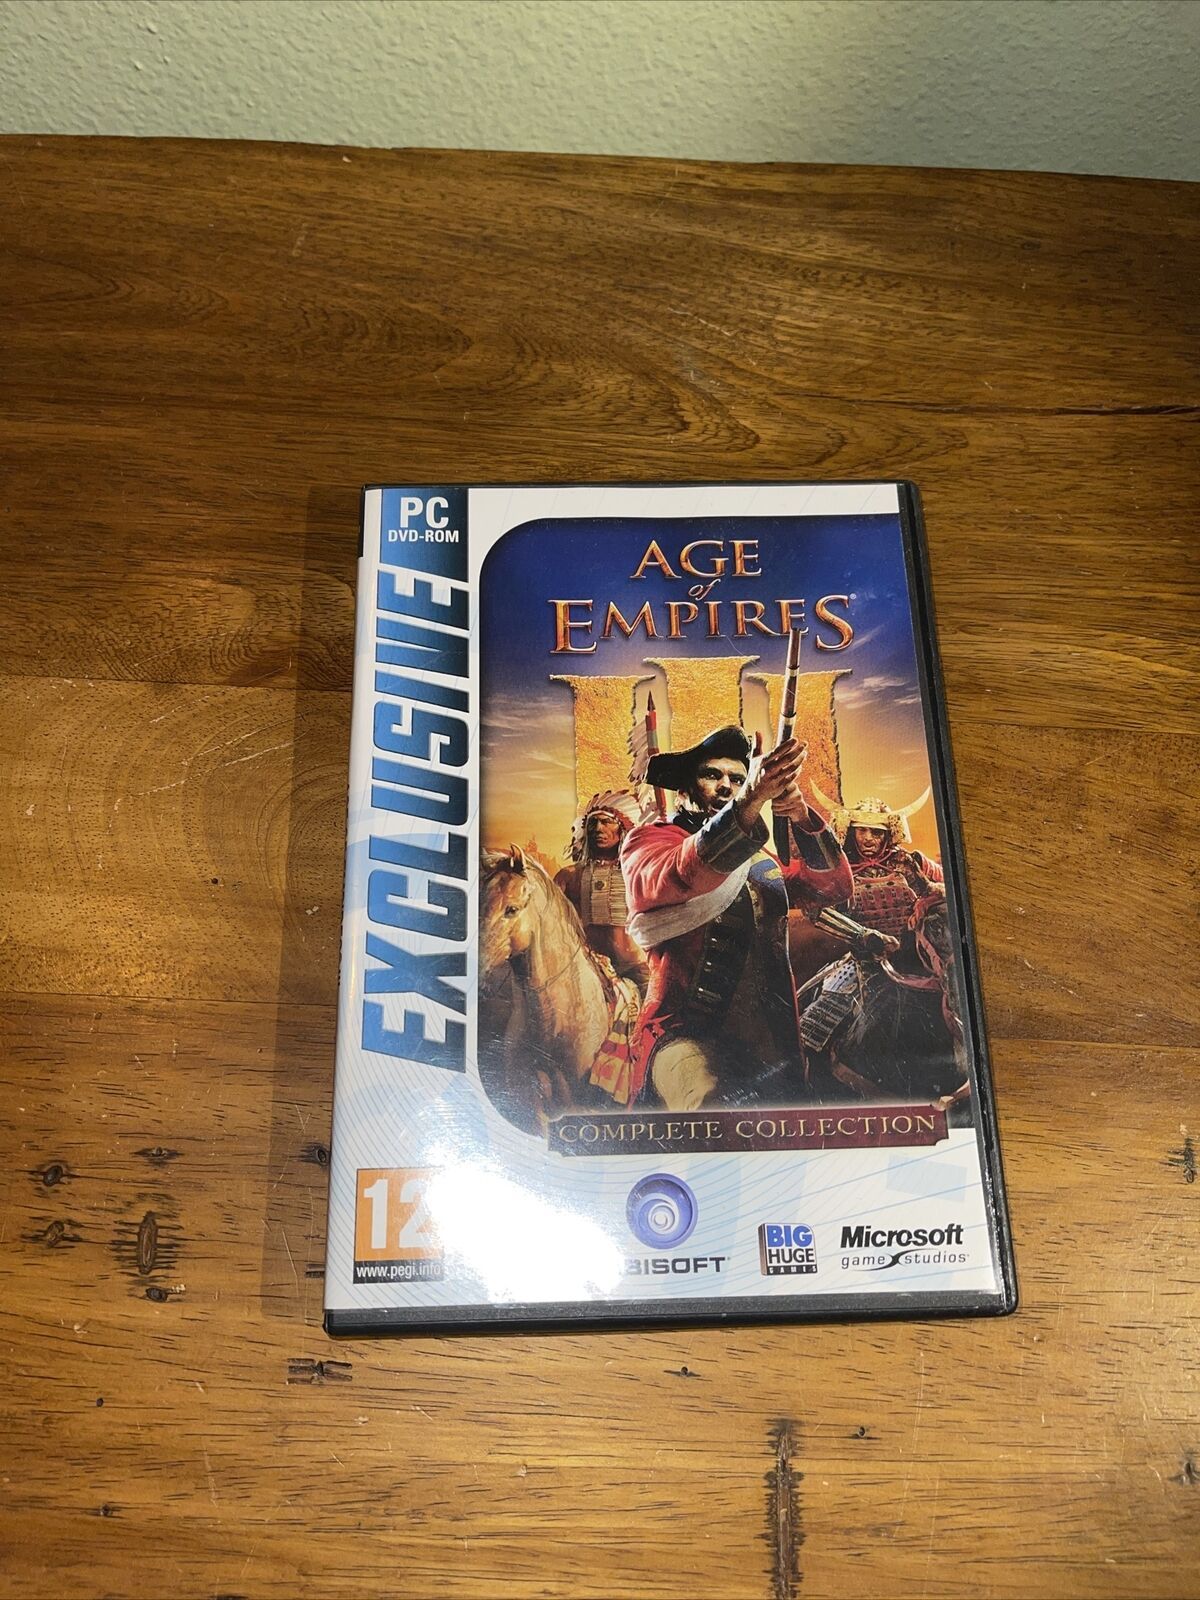 Primary image for Age of Empires III: Complete Collection (PC, 2009)